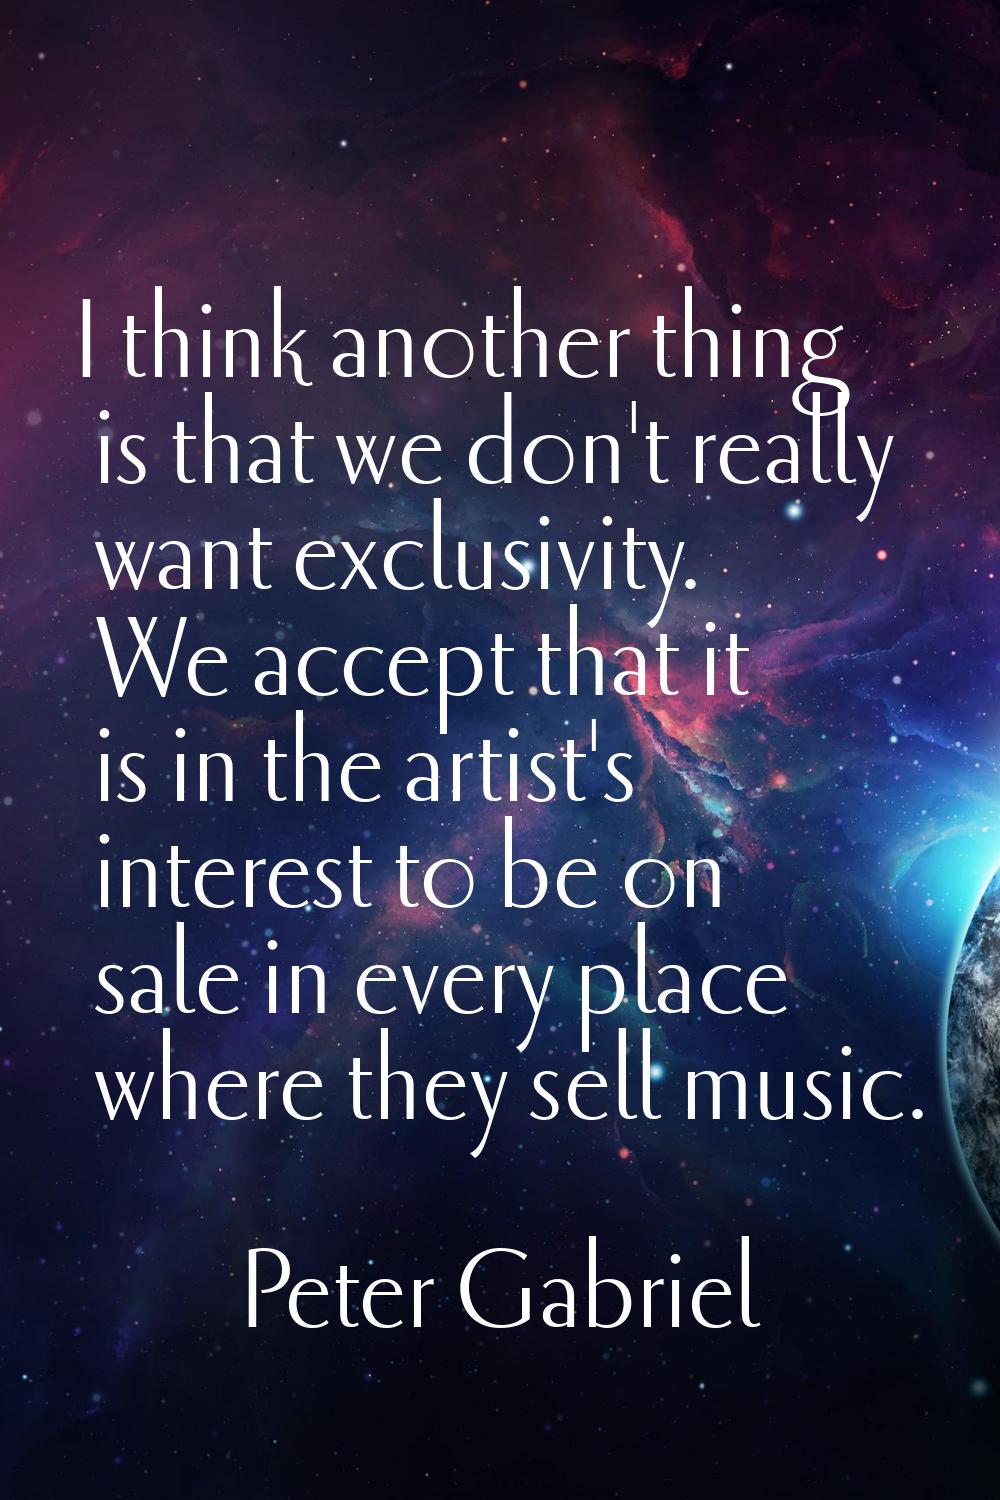 I think another thing is that we don't really want exclusivity. We accept that it is in the artist'